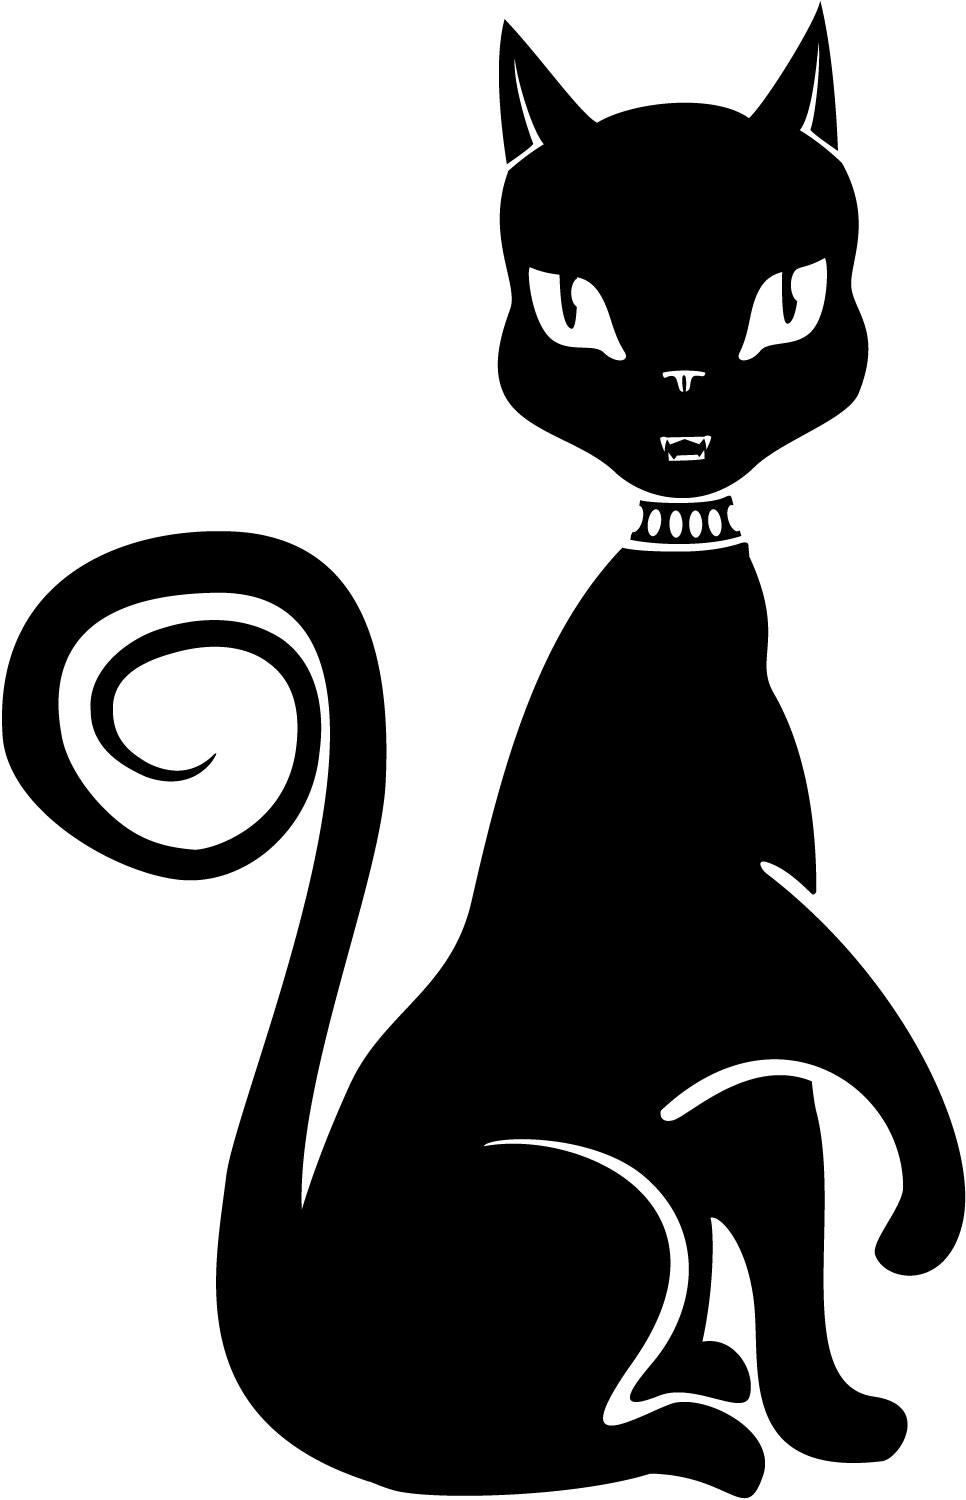 Cat Vector, Guitar Player Vector, Camel Clip Art and more | Free ...